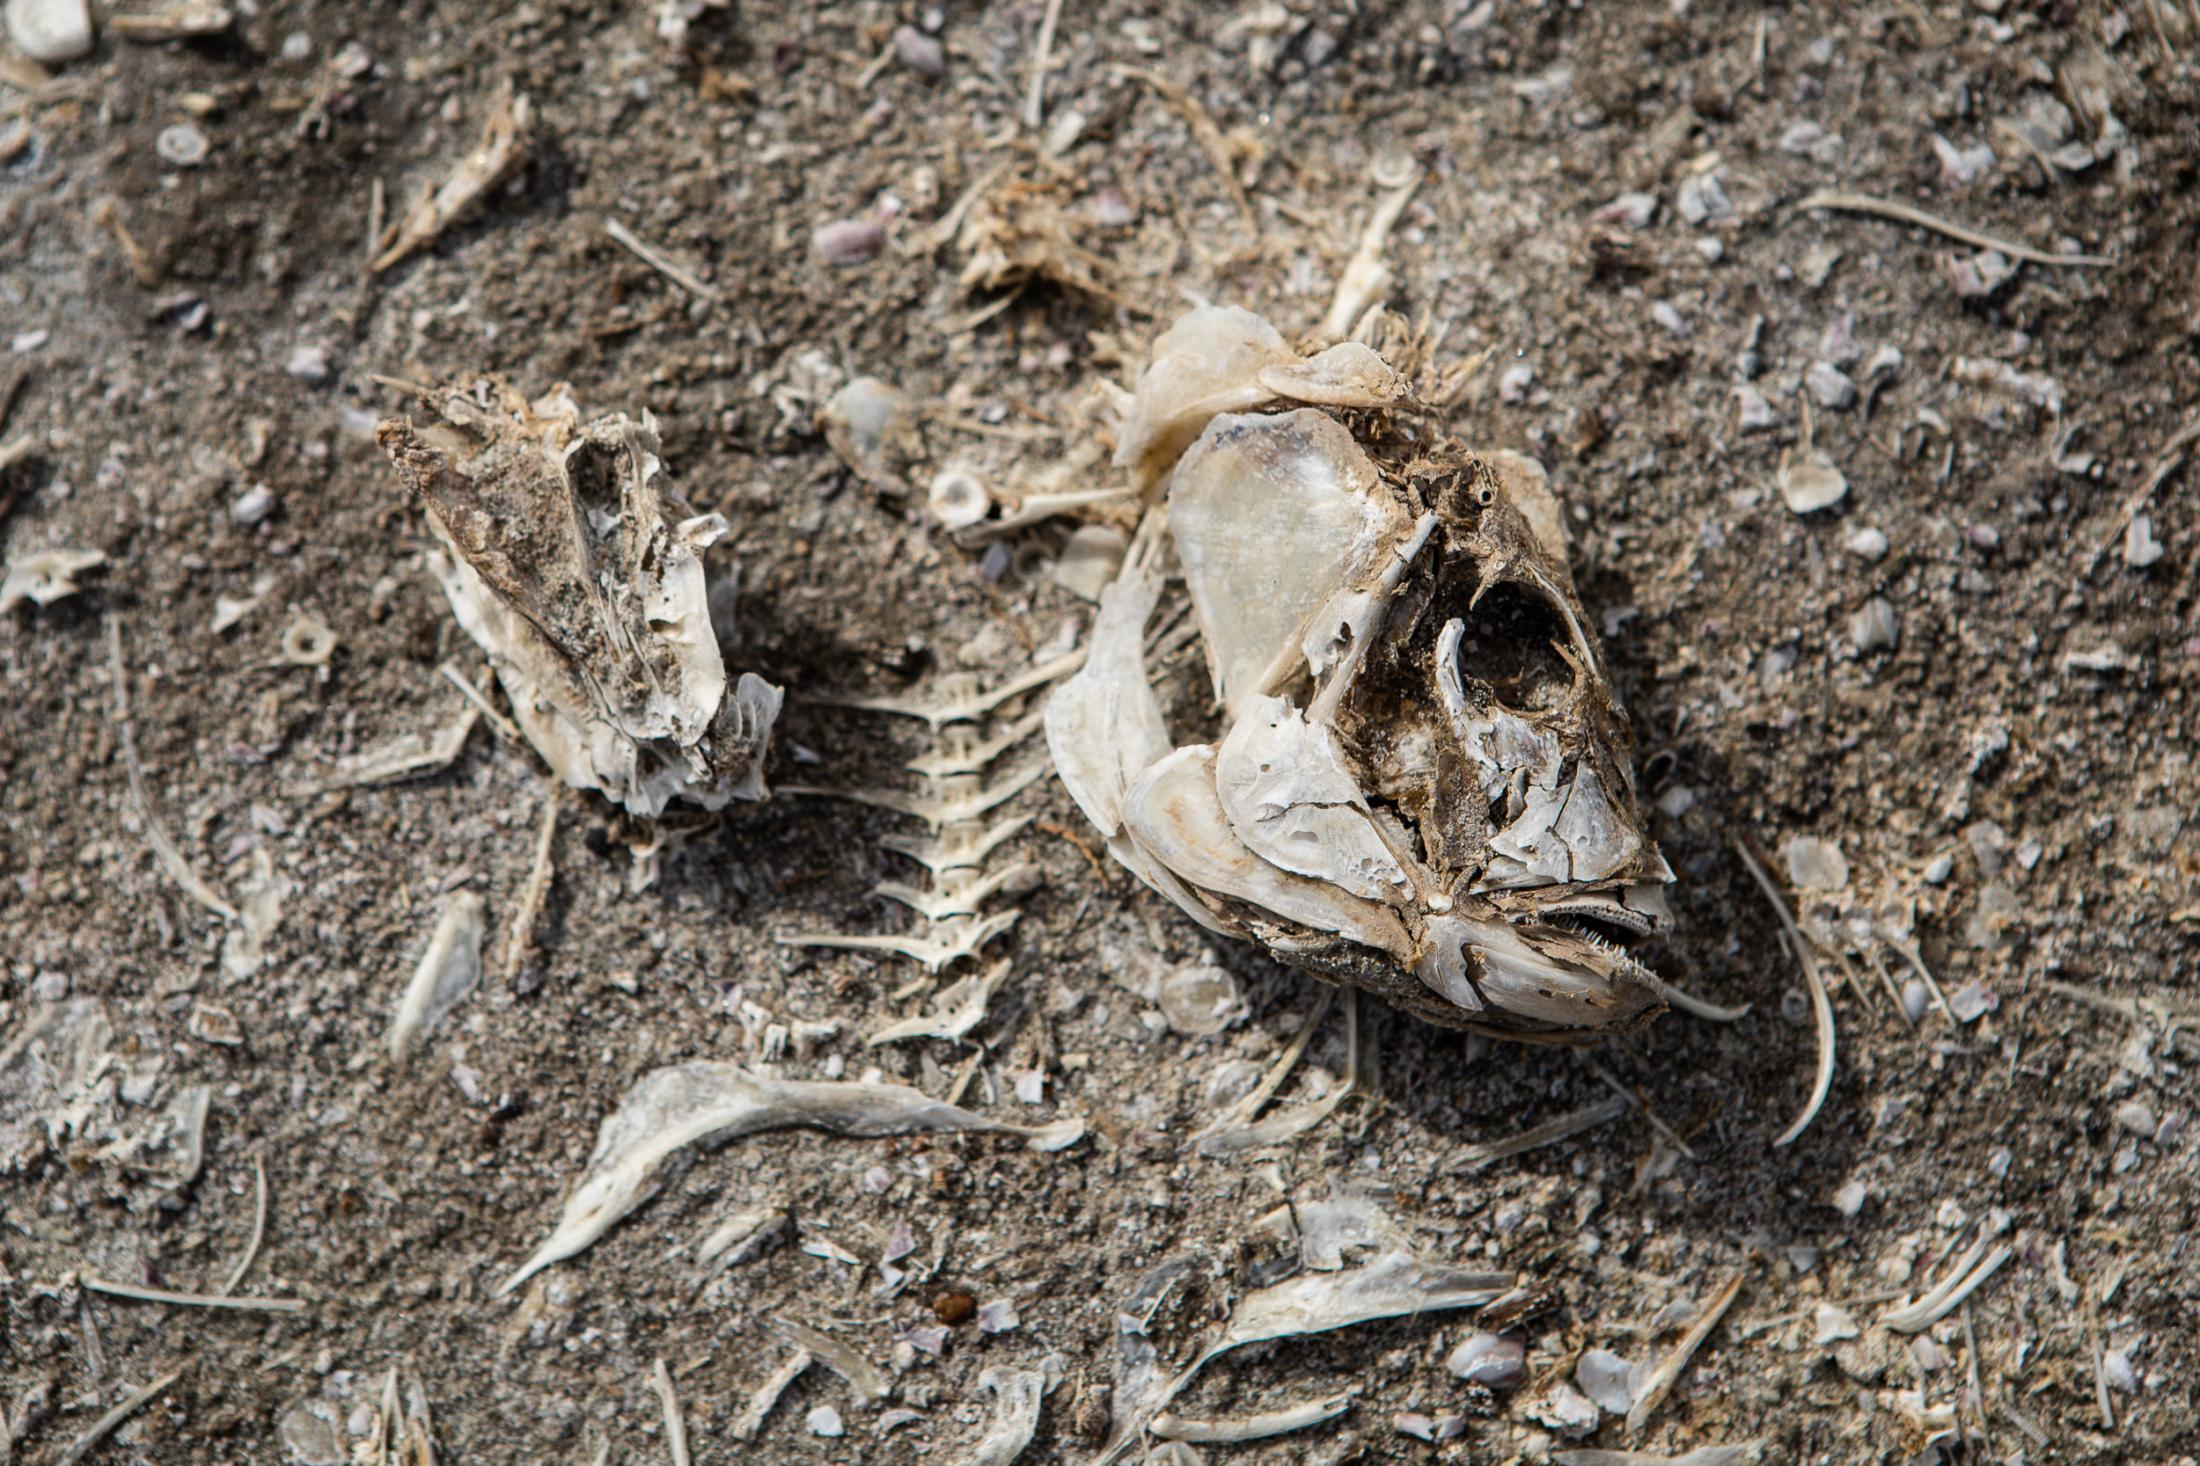  - The Salton Sea faces a crisis  -  A Tilapia skeleton lays as a reminder of the huge die...